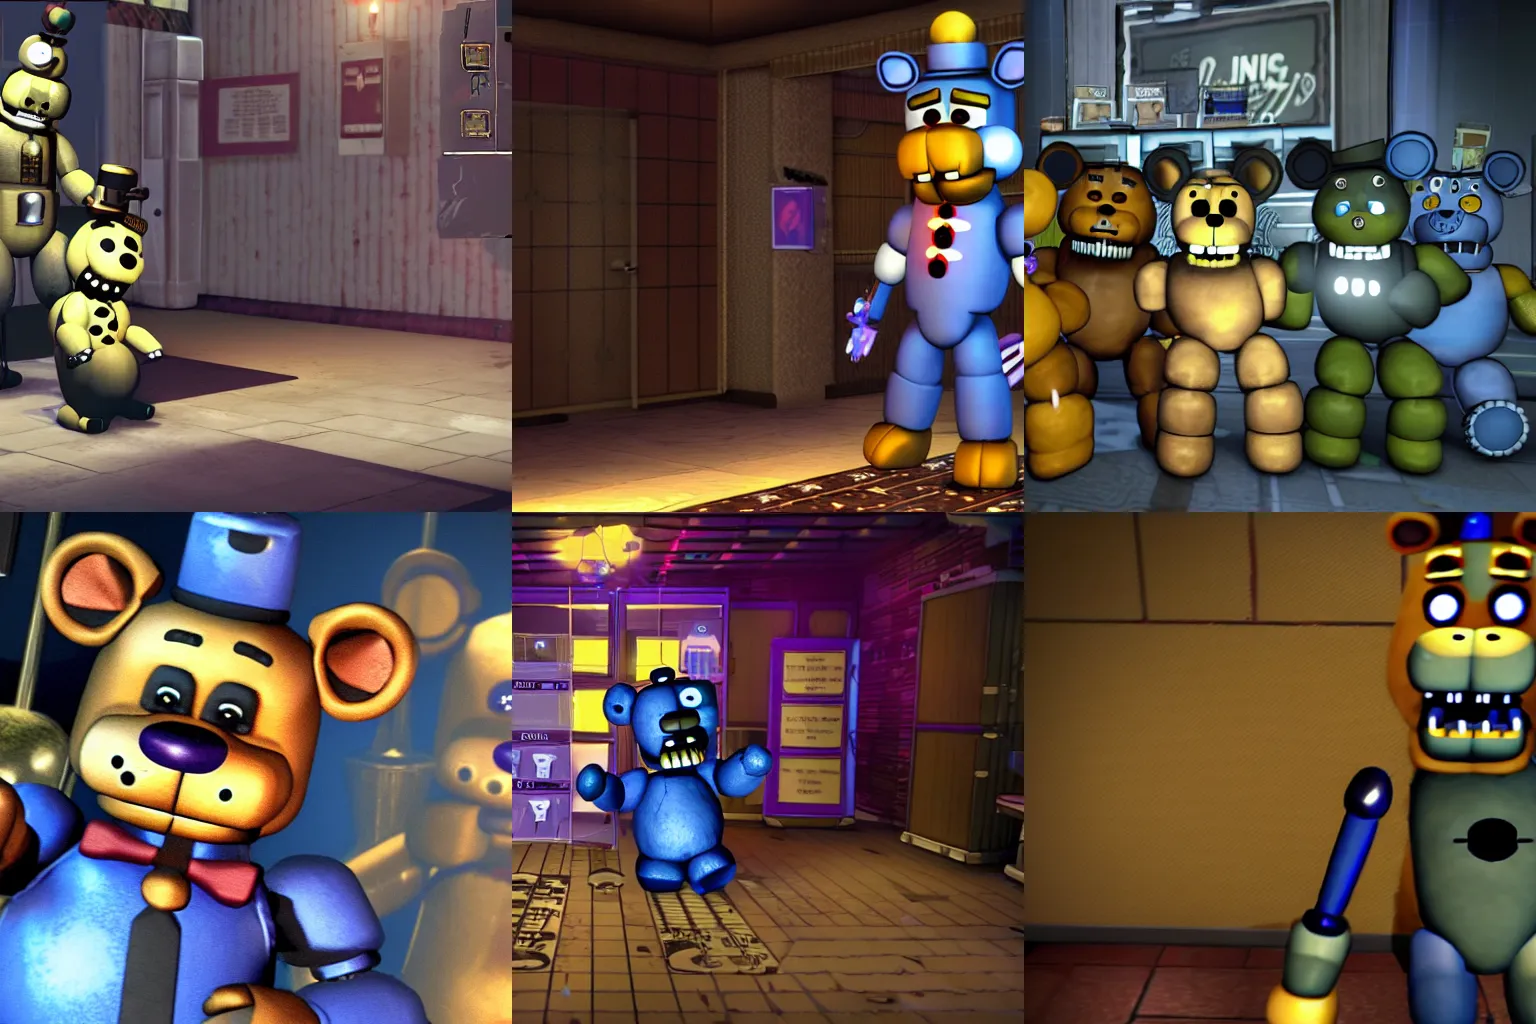 Five Nights at Freddys 1 3DS - GameBrew